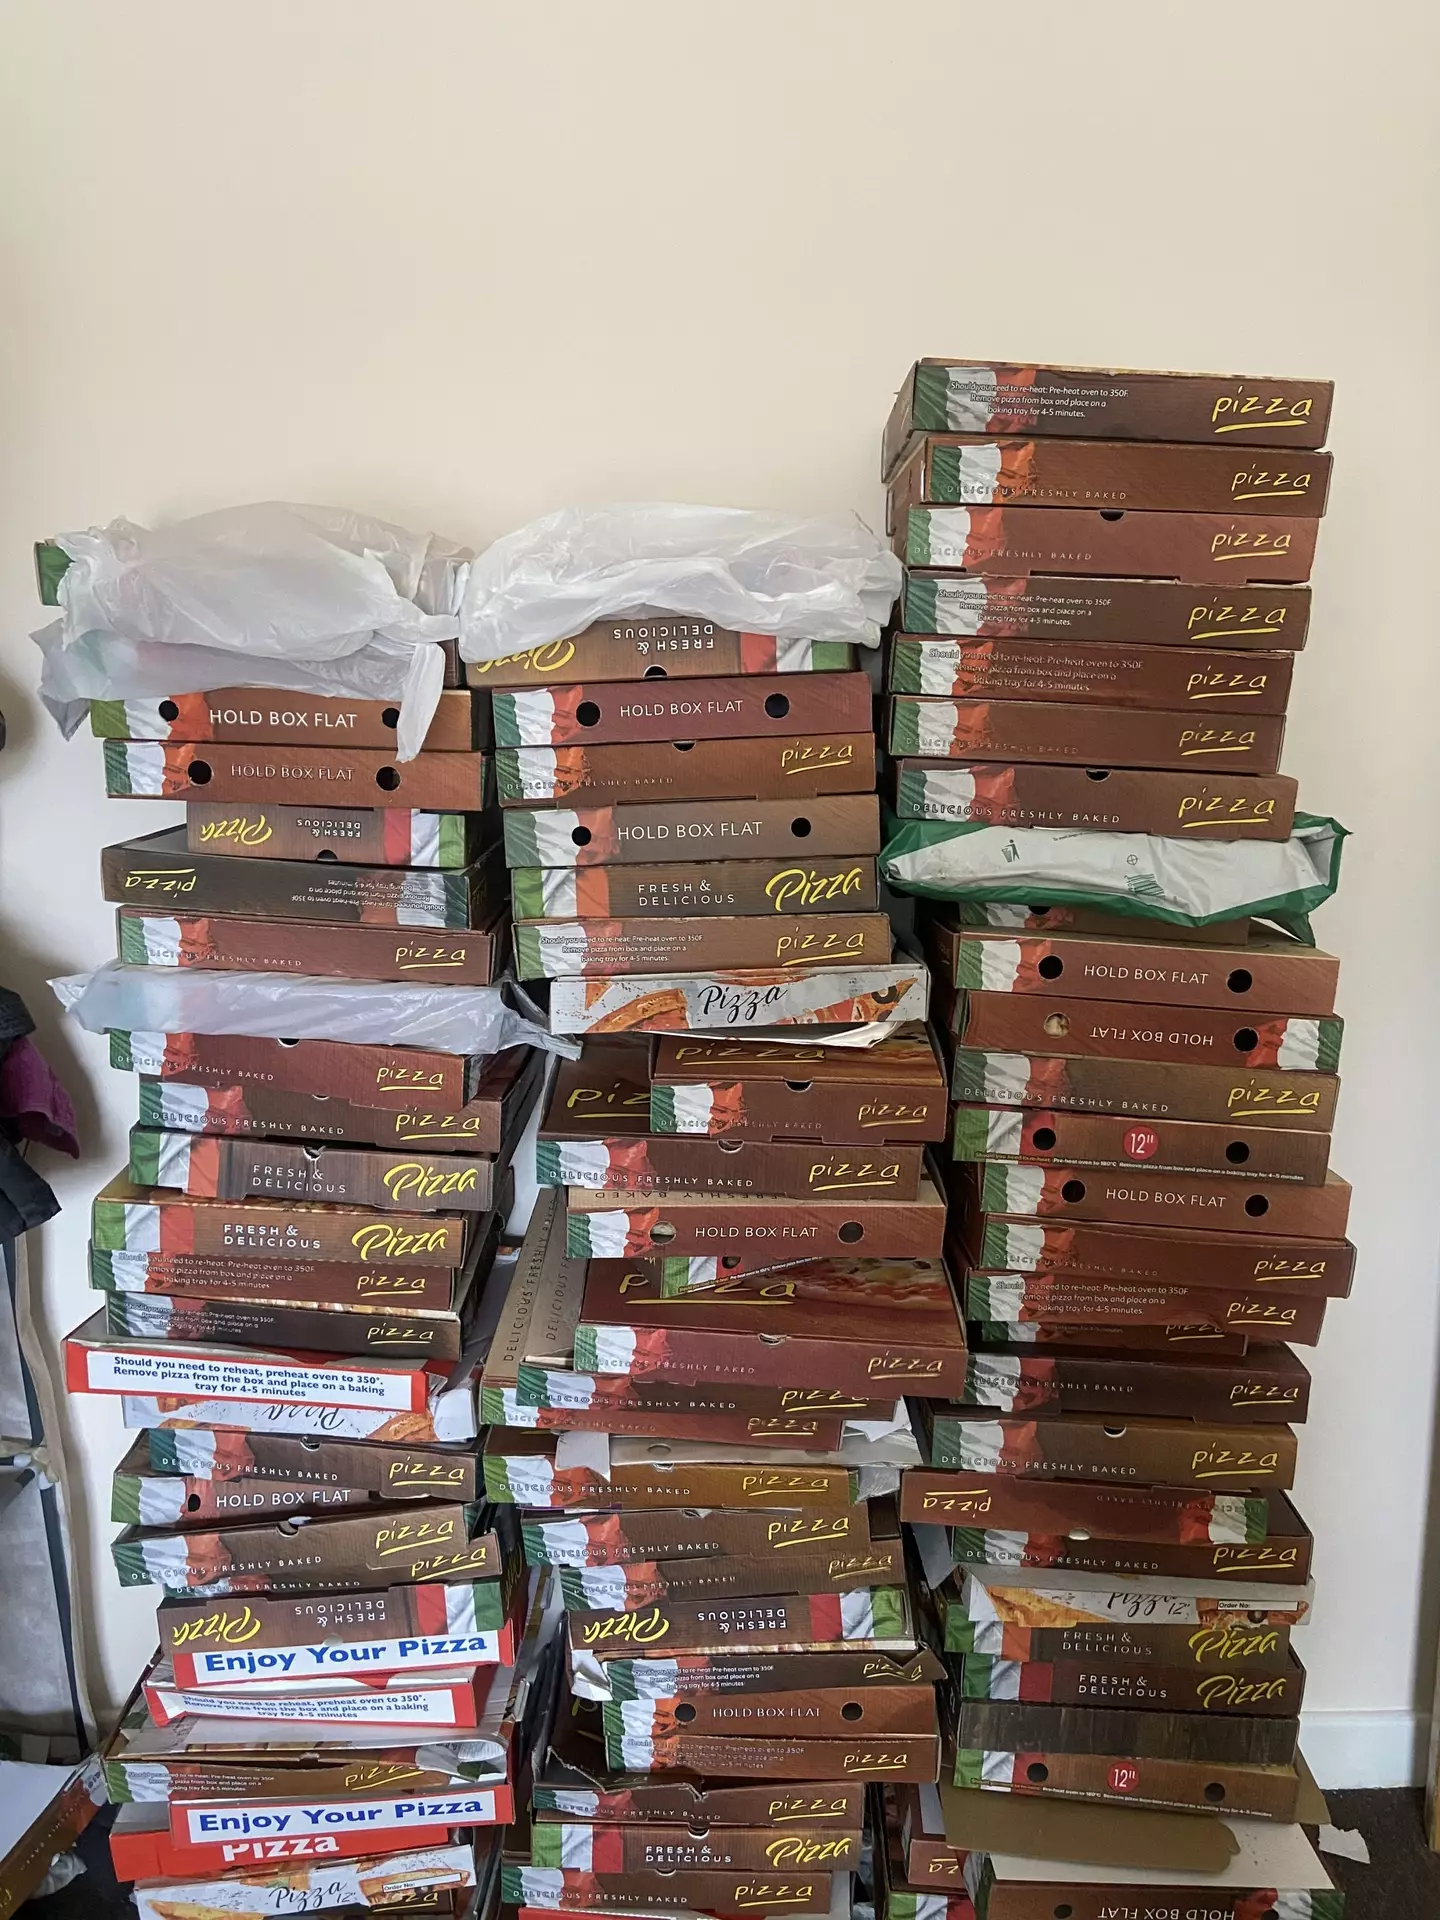 The pizza boxes.